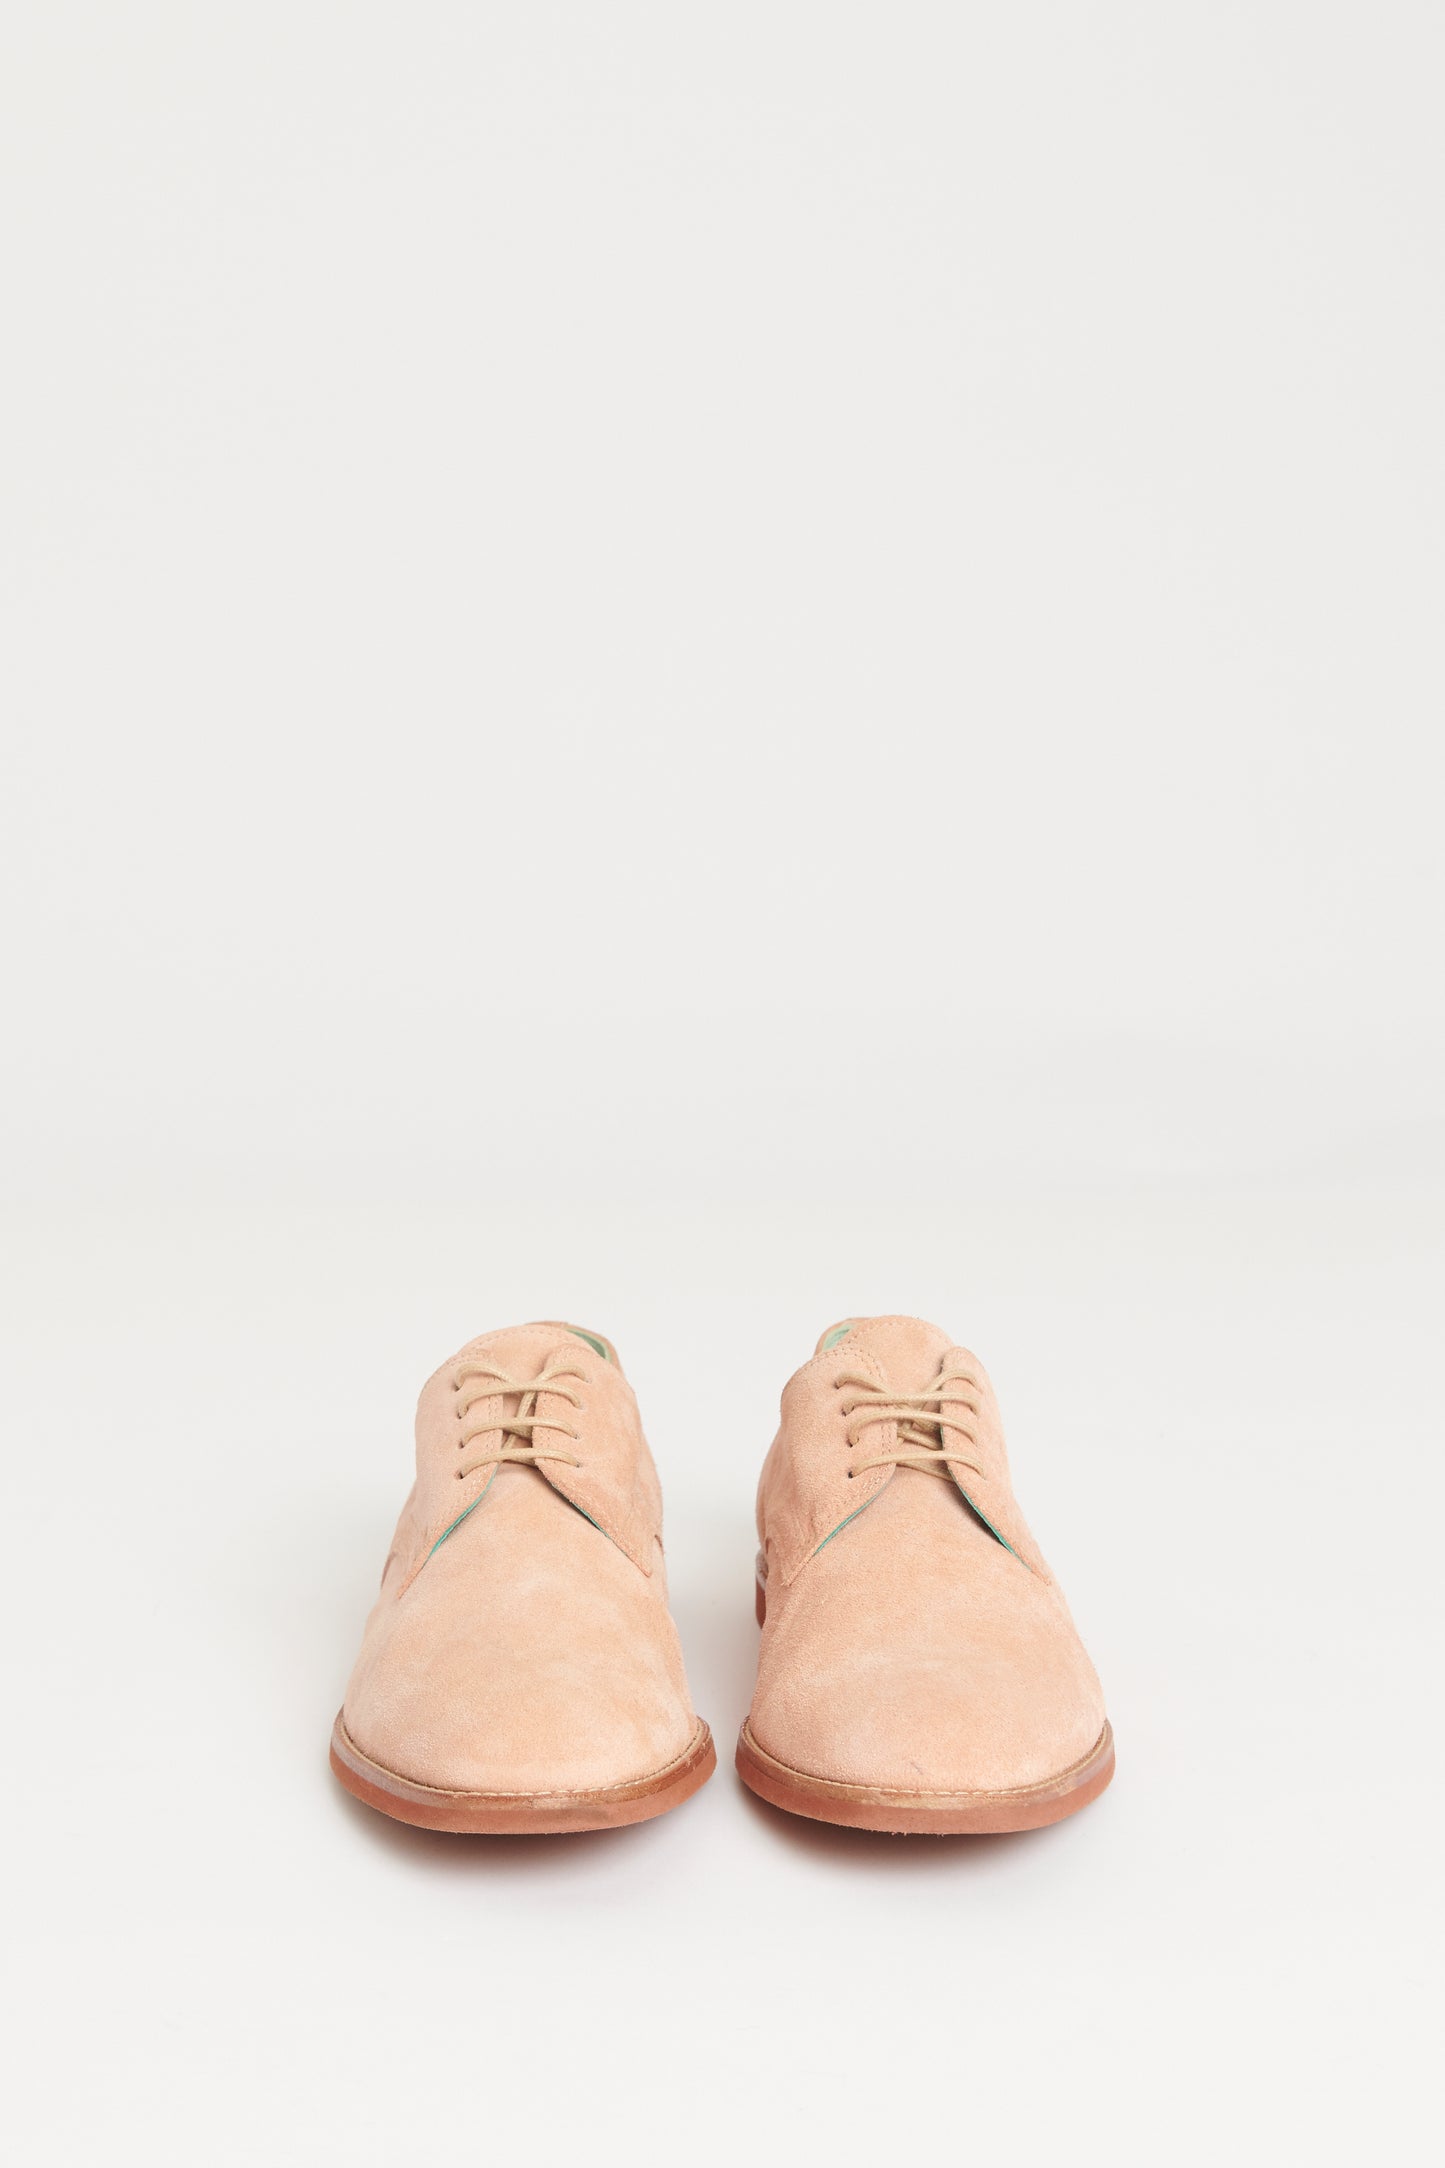 Salmon Pink Suede Preowned Bukka Joe Lace Up Oxfords